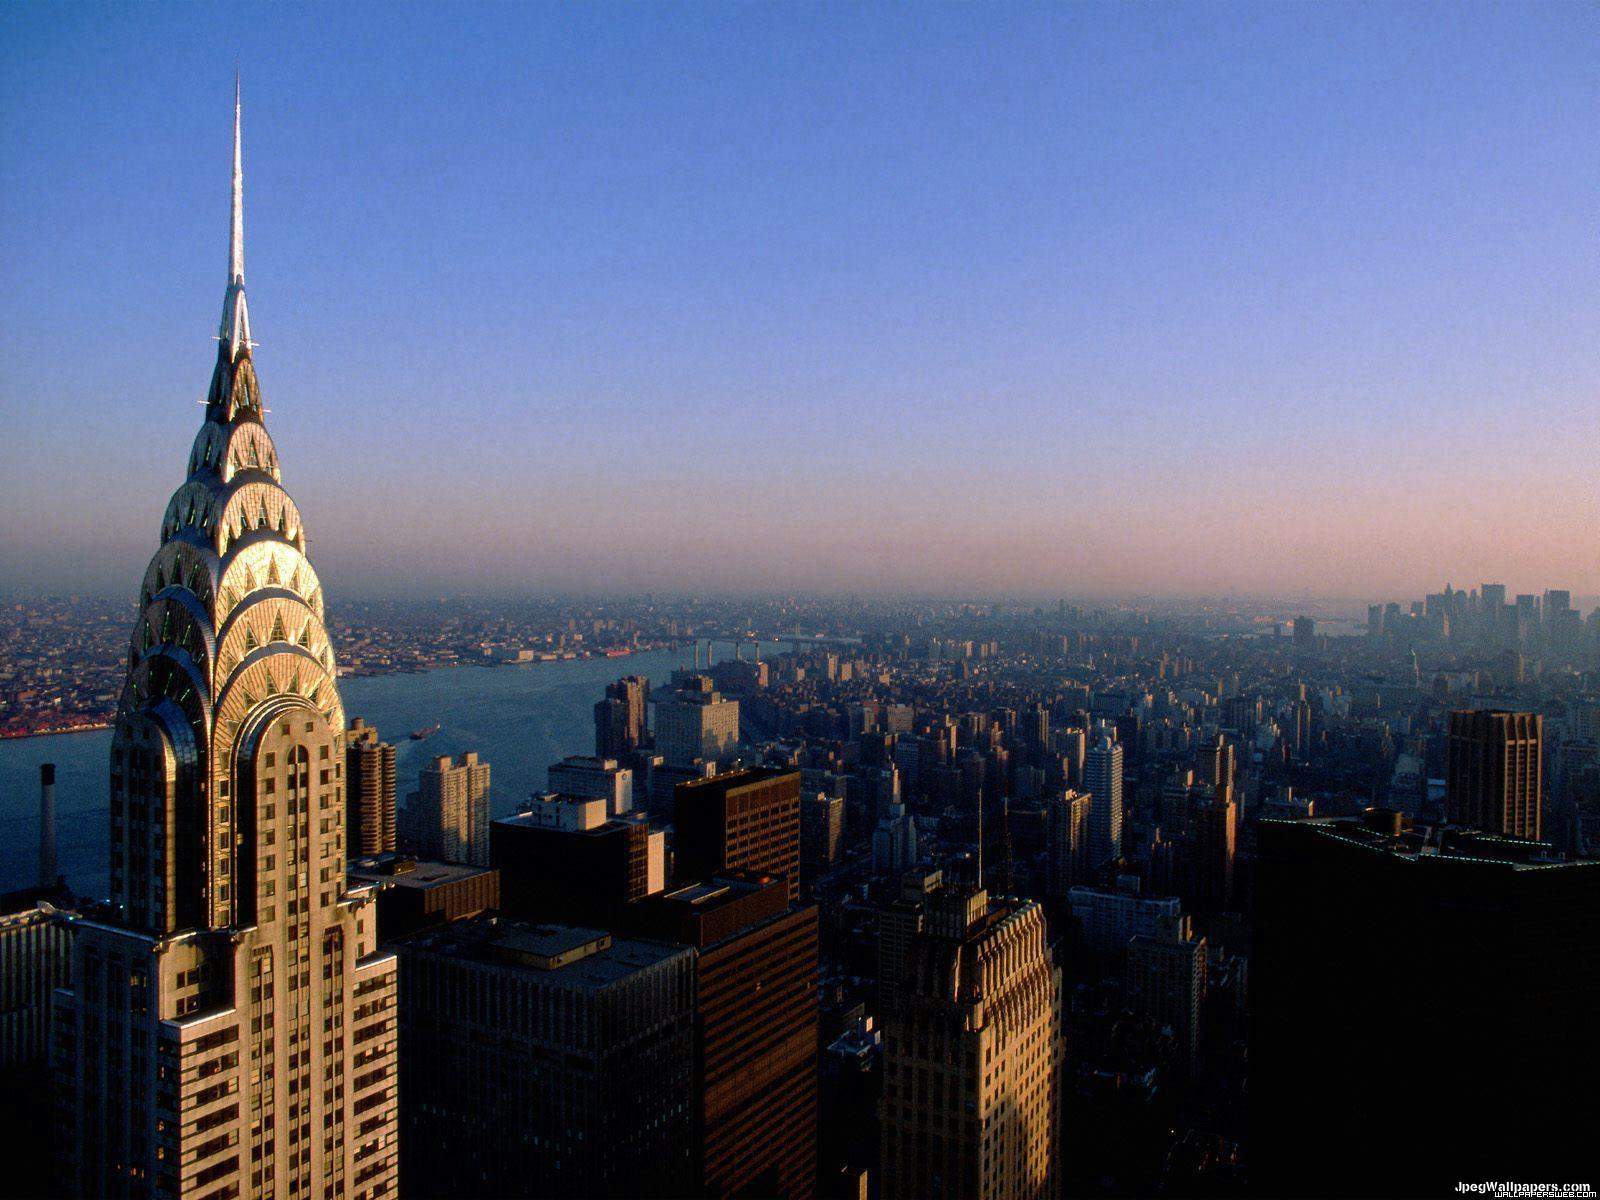 When completed in 1930, the Chrysler Building was the tallest in the world 